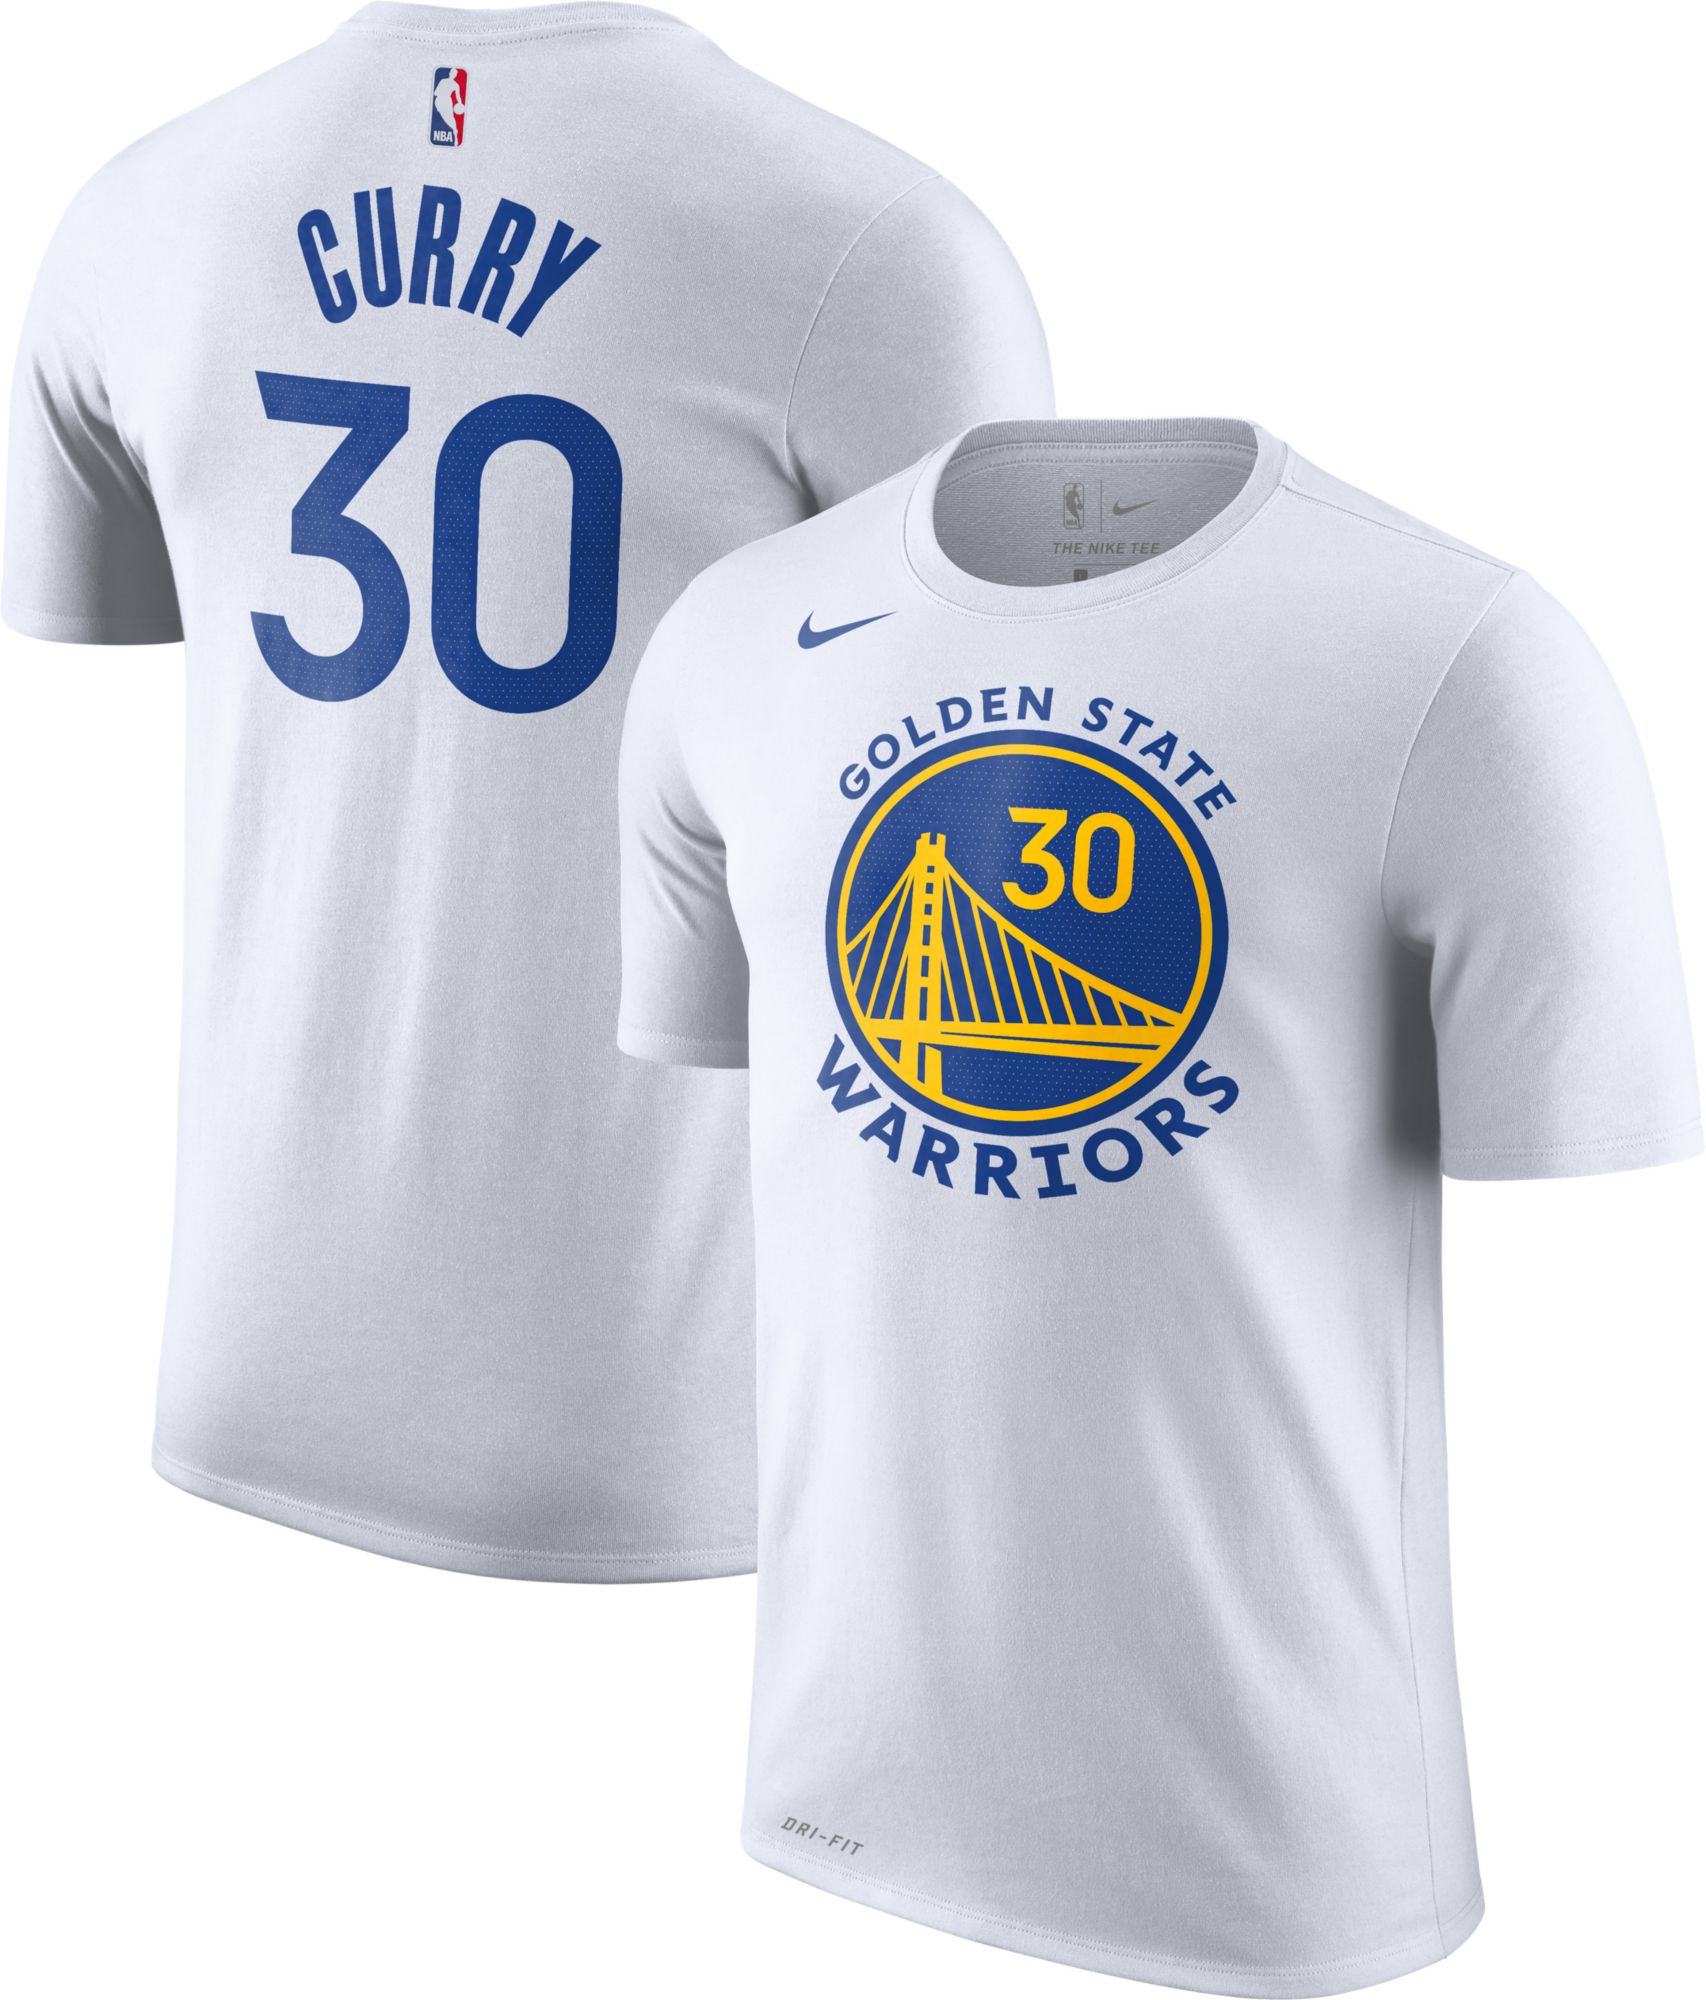 stephen curry t shirt jersey youth